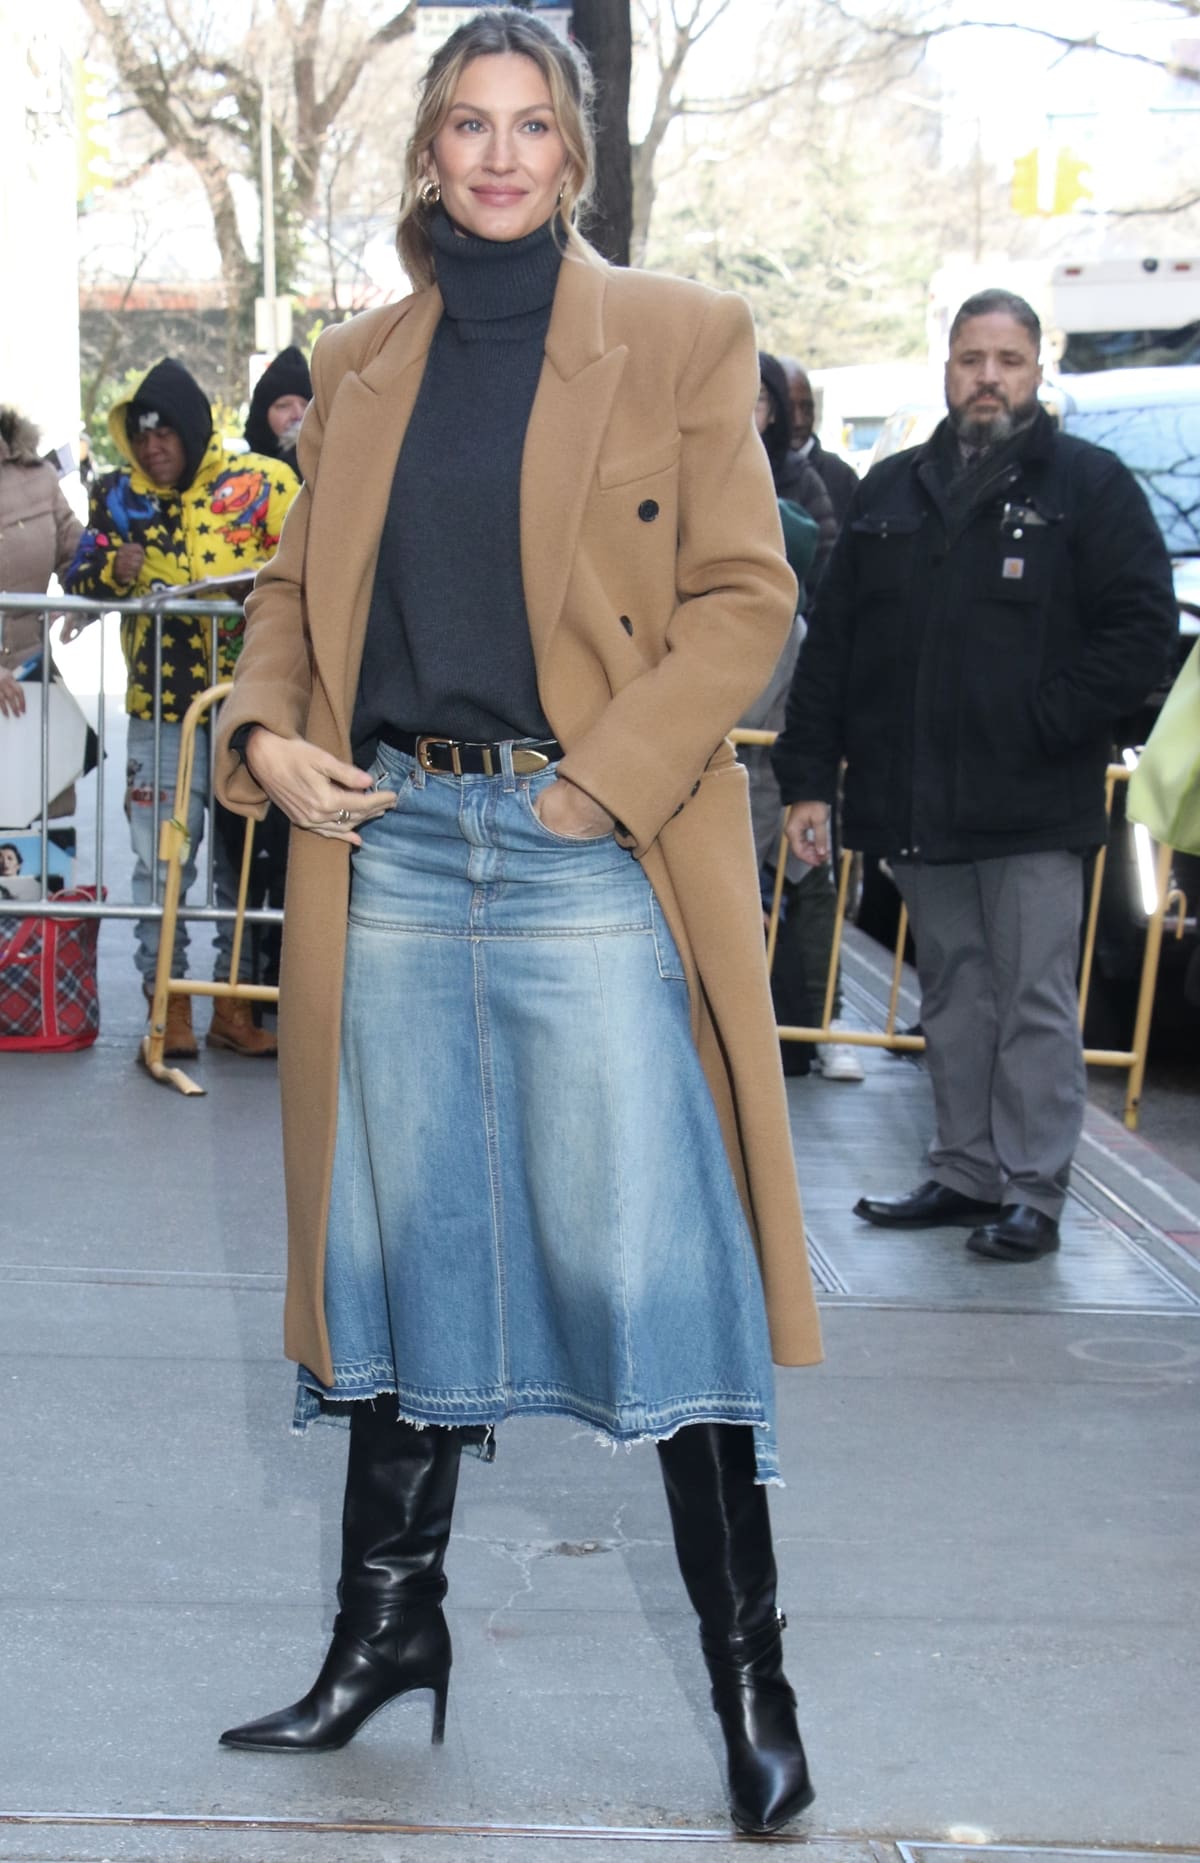 Gisele Bündchen breathes new life into the denim skirt, pairing a Victoria Beckham creation with knee-high Celine boots for an unexpected twist